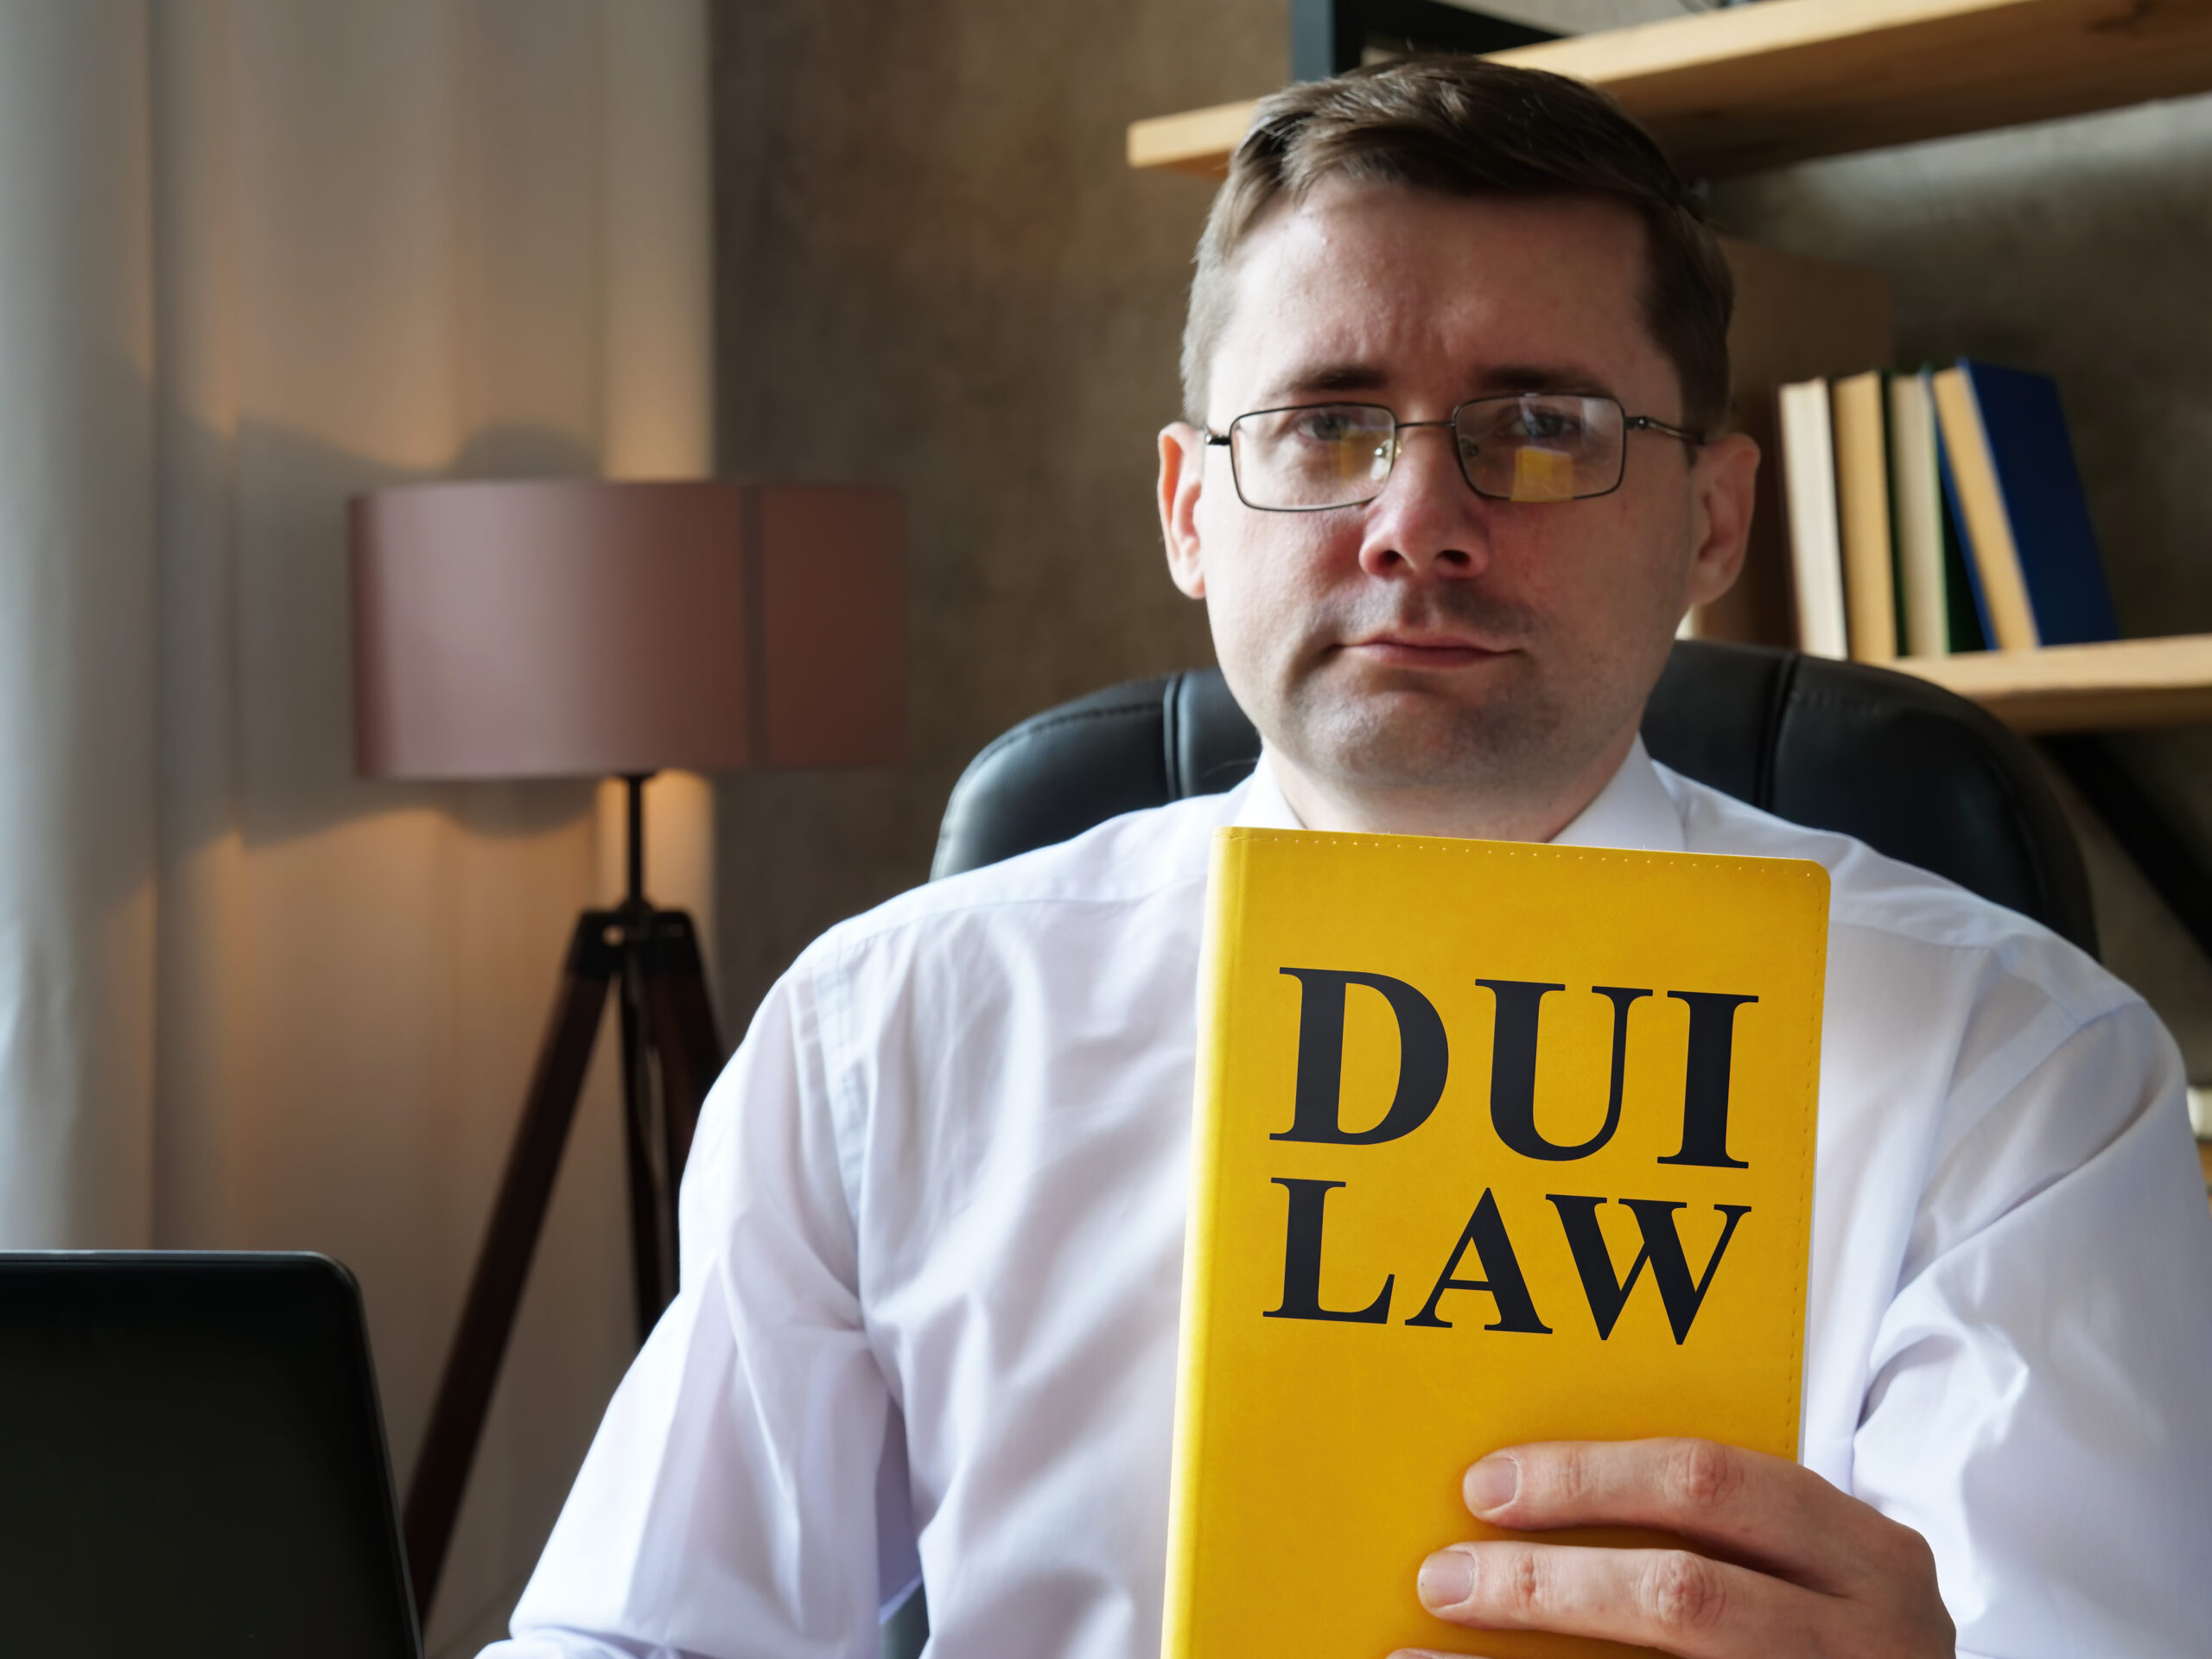 A Glenn Heights DWI lawyer holding up a book that says “DUI Law”